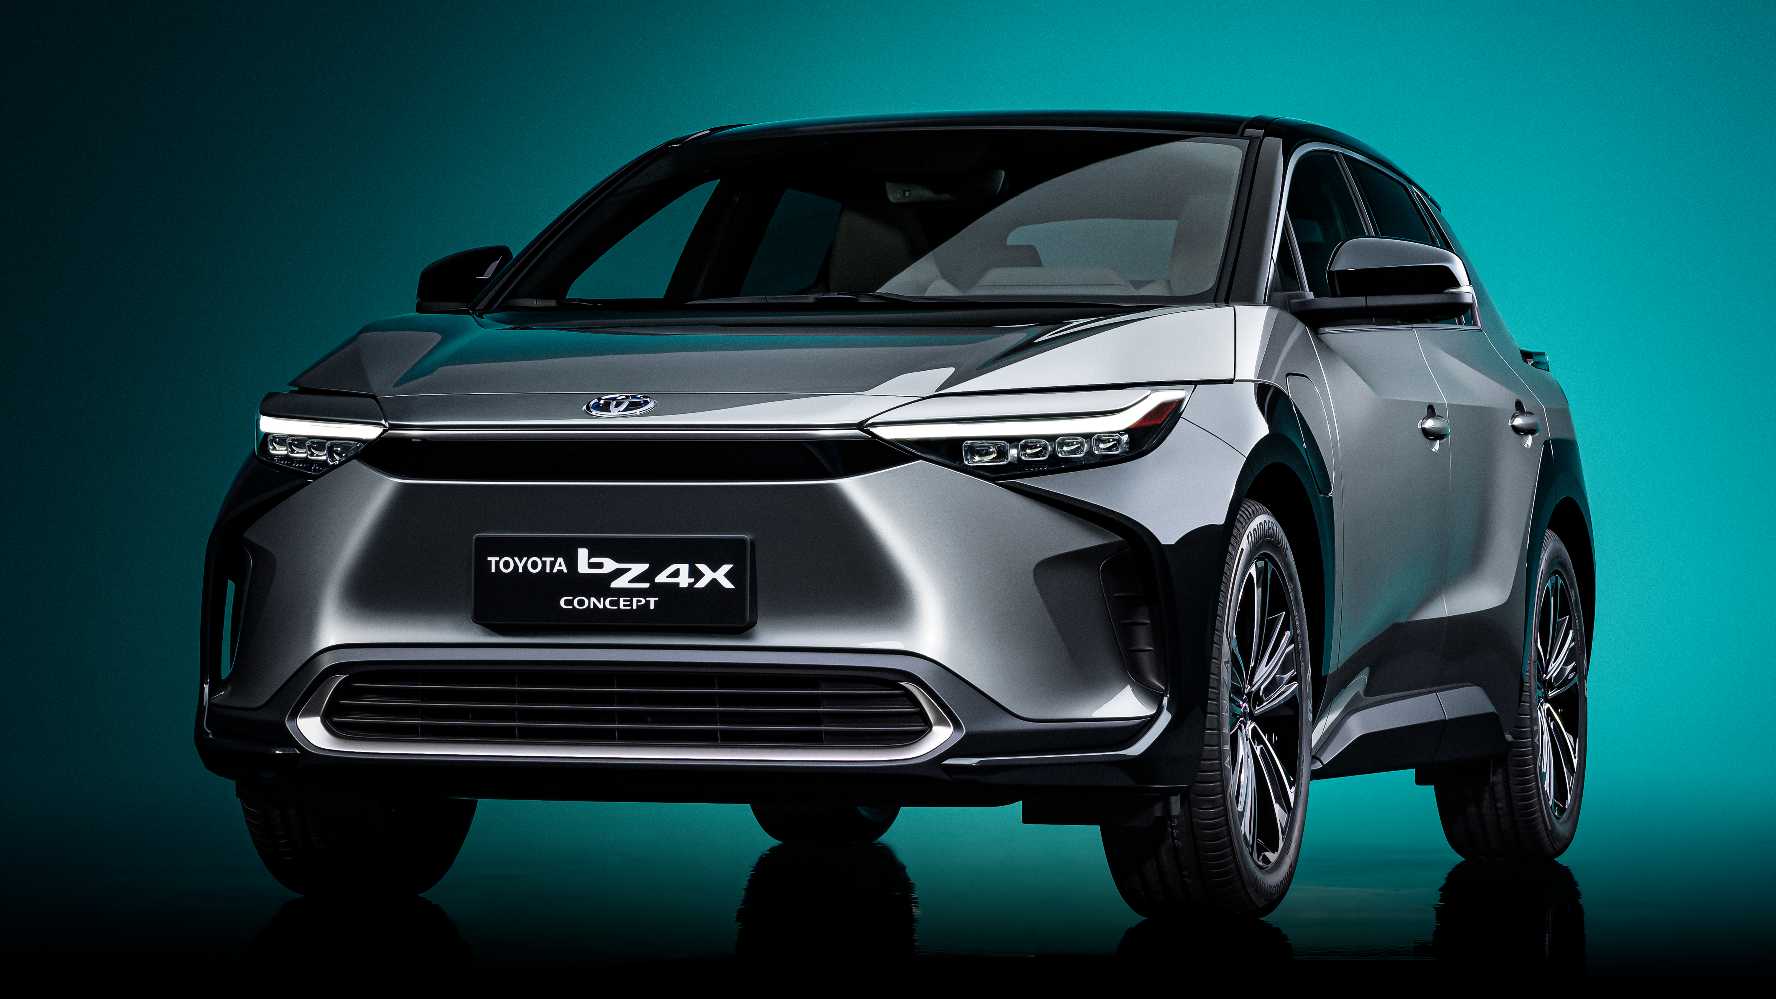 Toyota's first global BEV, the bZ4x SUV, is only set to enter production by 2022. Image: Toyota